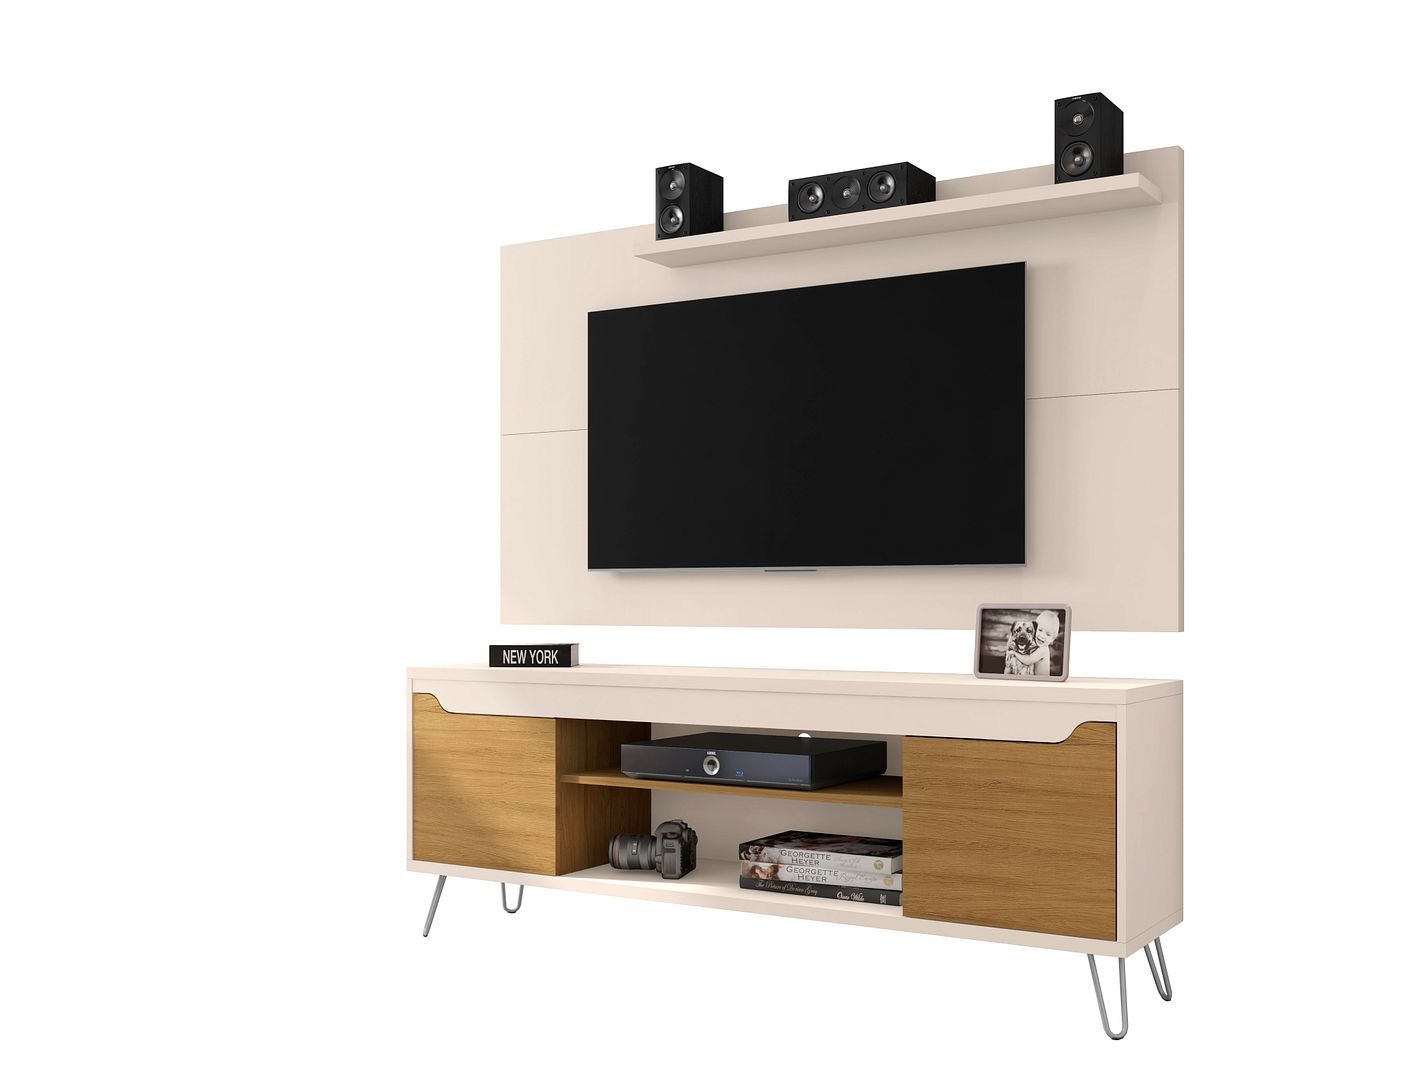 Baxter 62.99" TV Stand and Liberty Panel